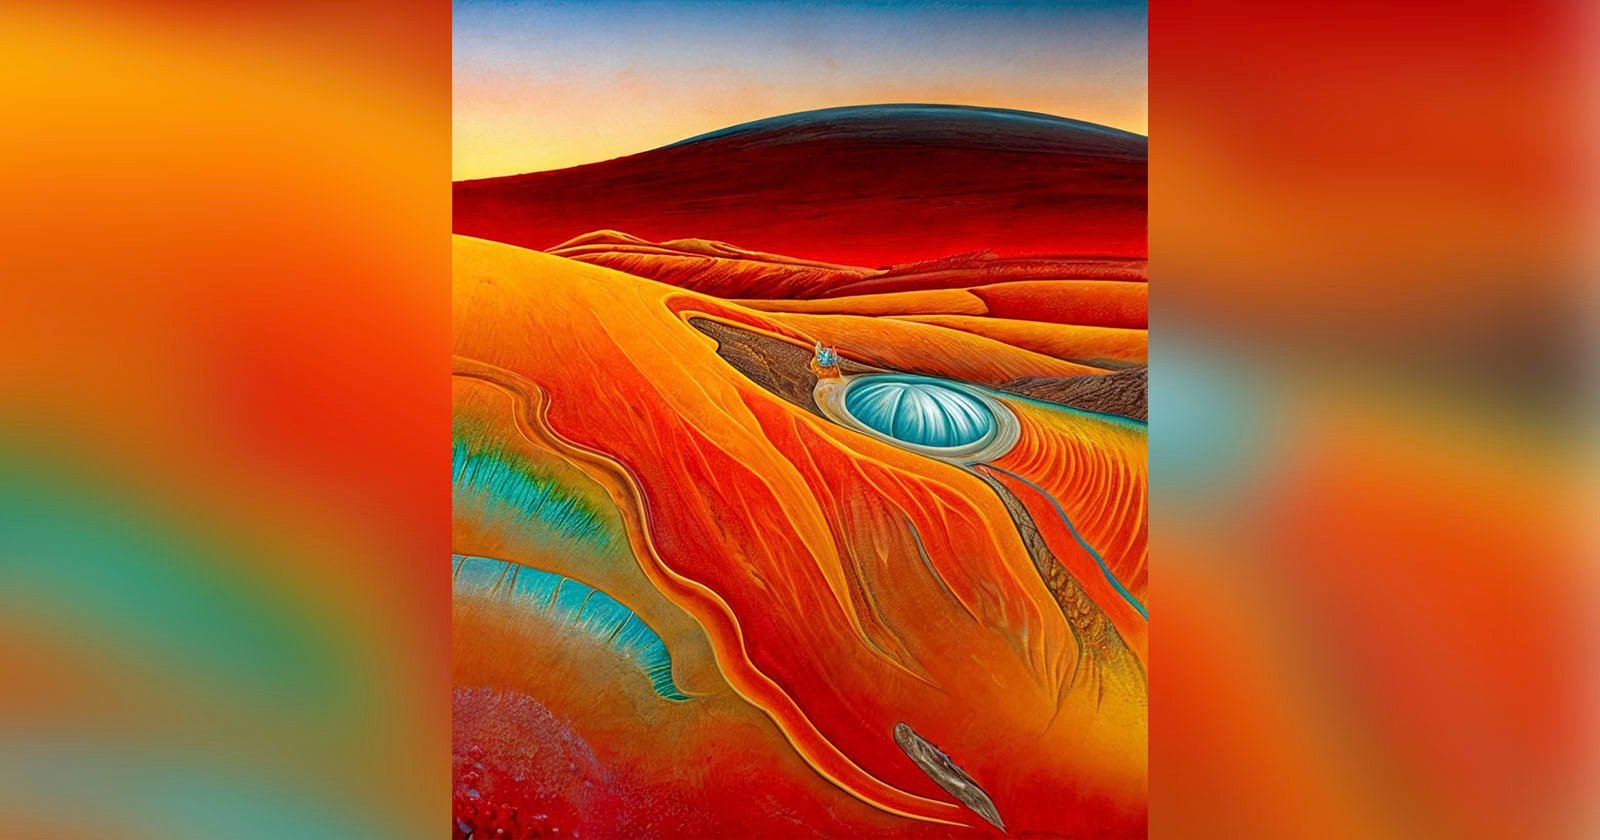 A surreal desert landscape painting features vibrant red and orange rolling hills under a gradient yellow to blue sky. At the center, a silver dome-like structure and winding paths add a sense of mystery and intrigue to the arid scene.